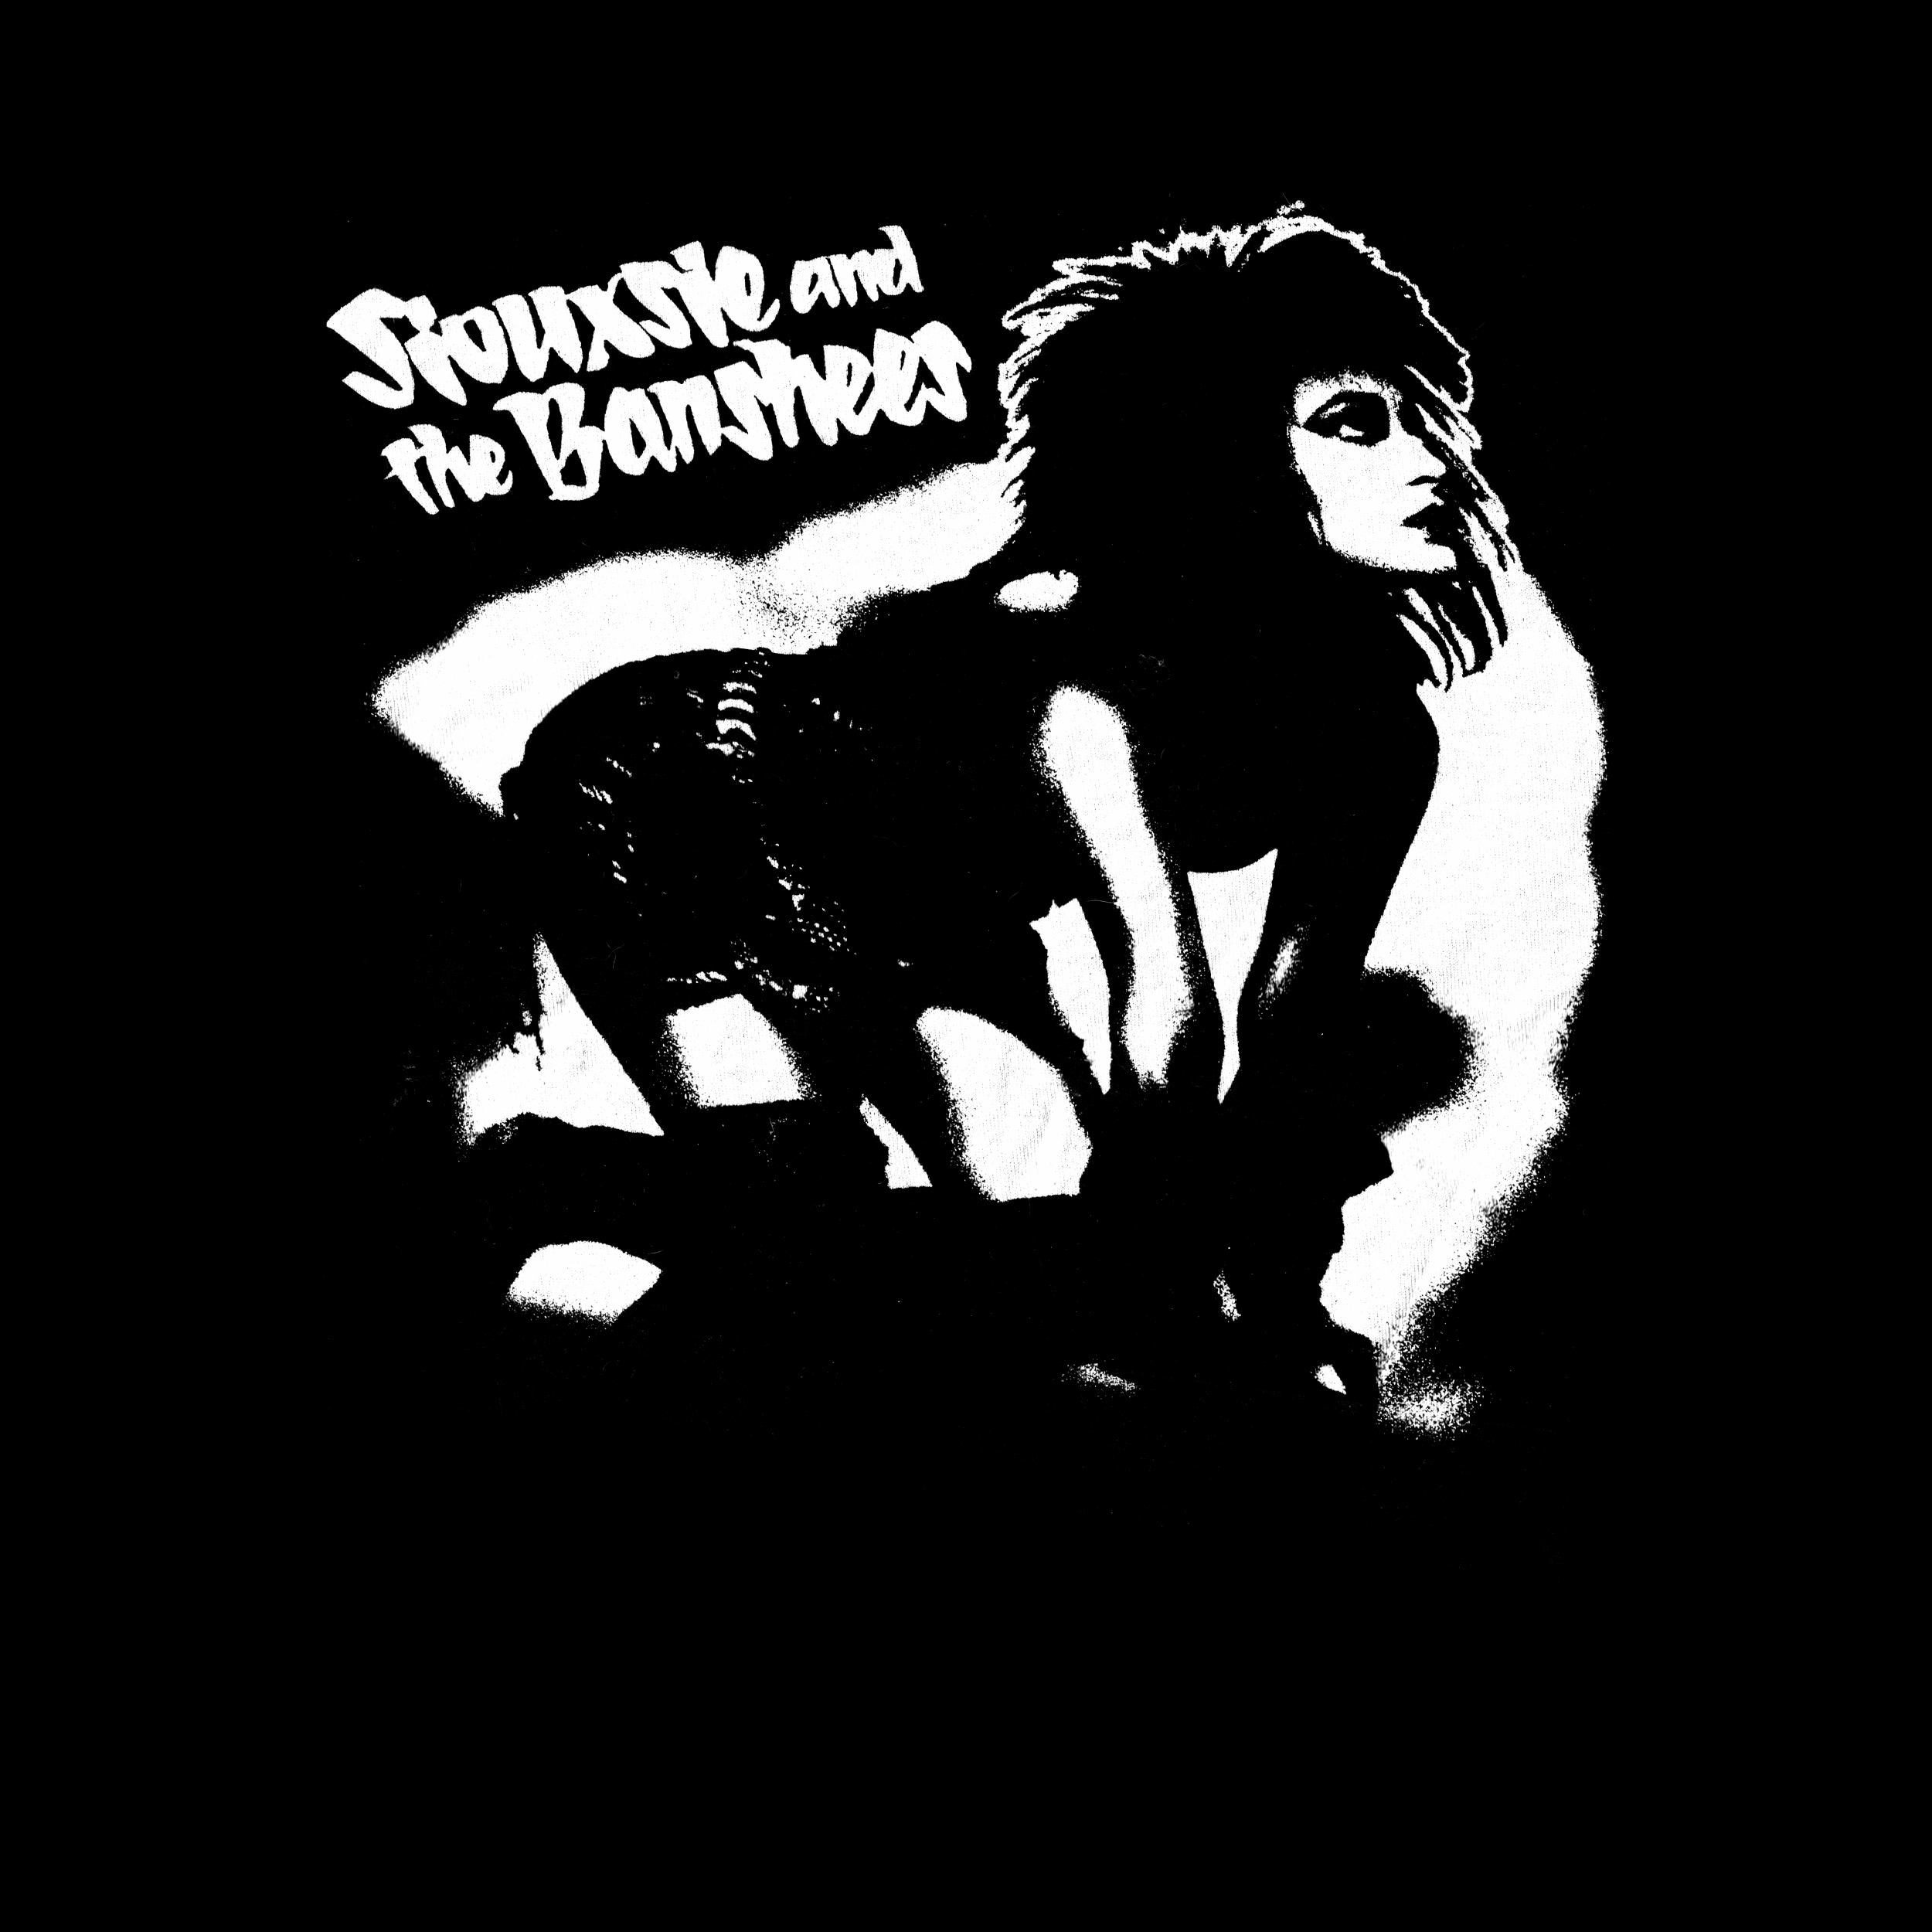 Siouxsie And The Banshees Premium Tee